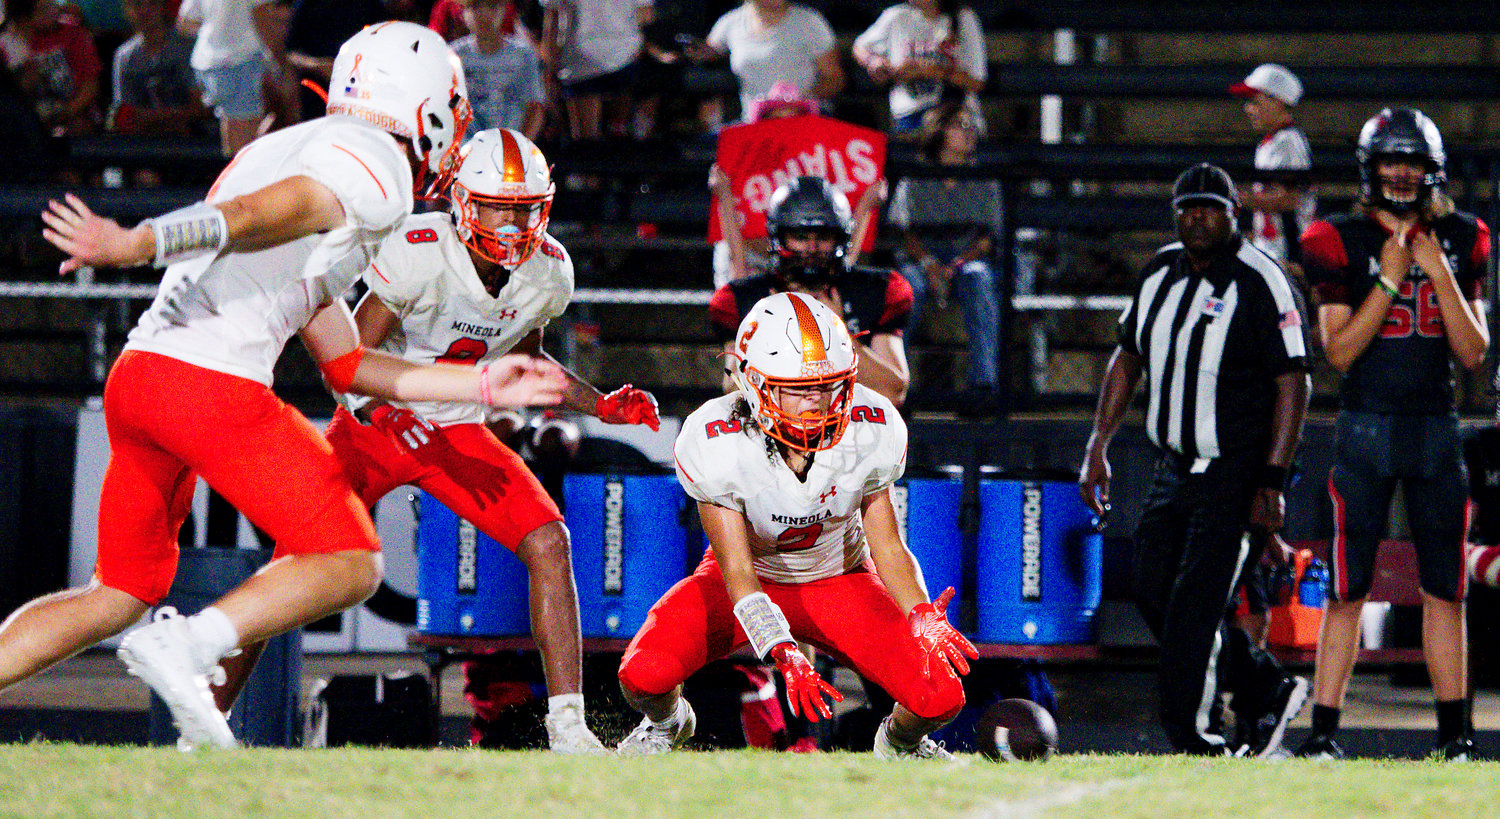 Mario Bautista sows good hands in recovering a Hughes Springs onside kick attempt agaiknst Mineola Friday night.